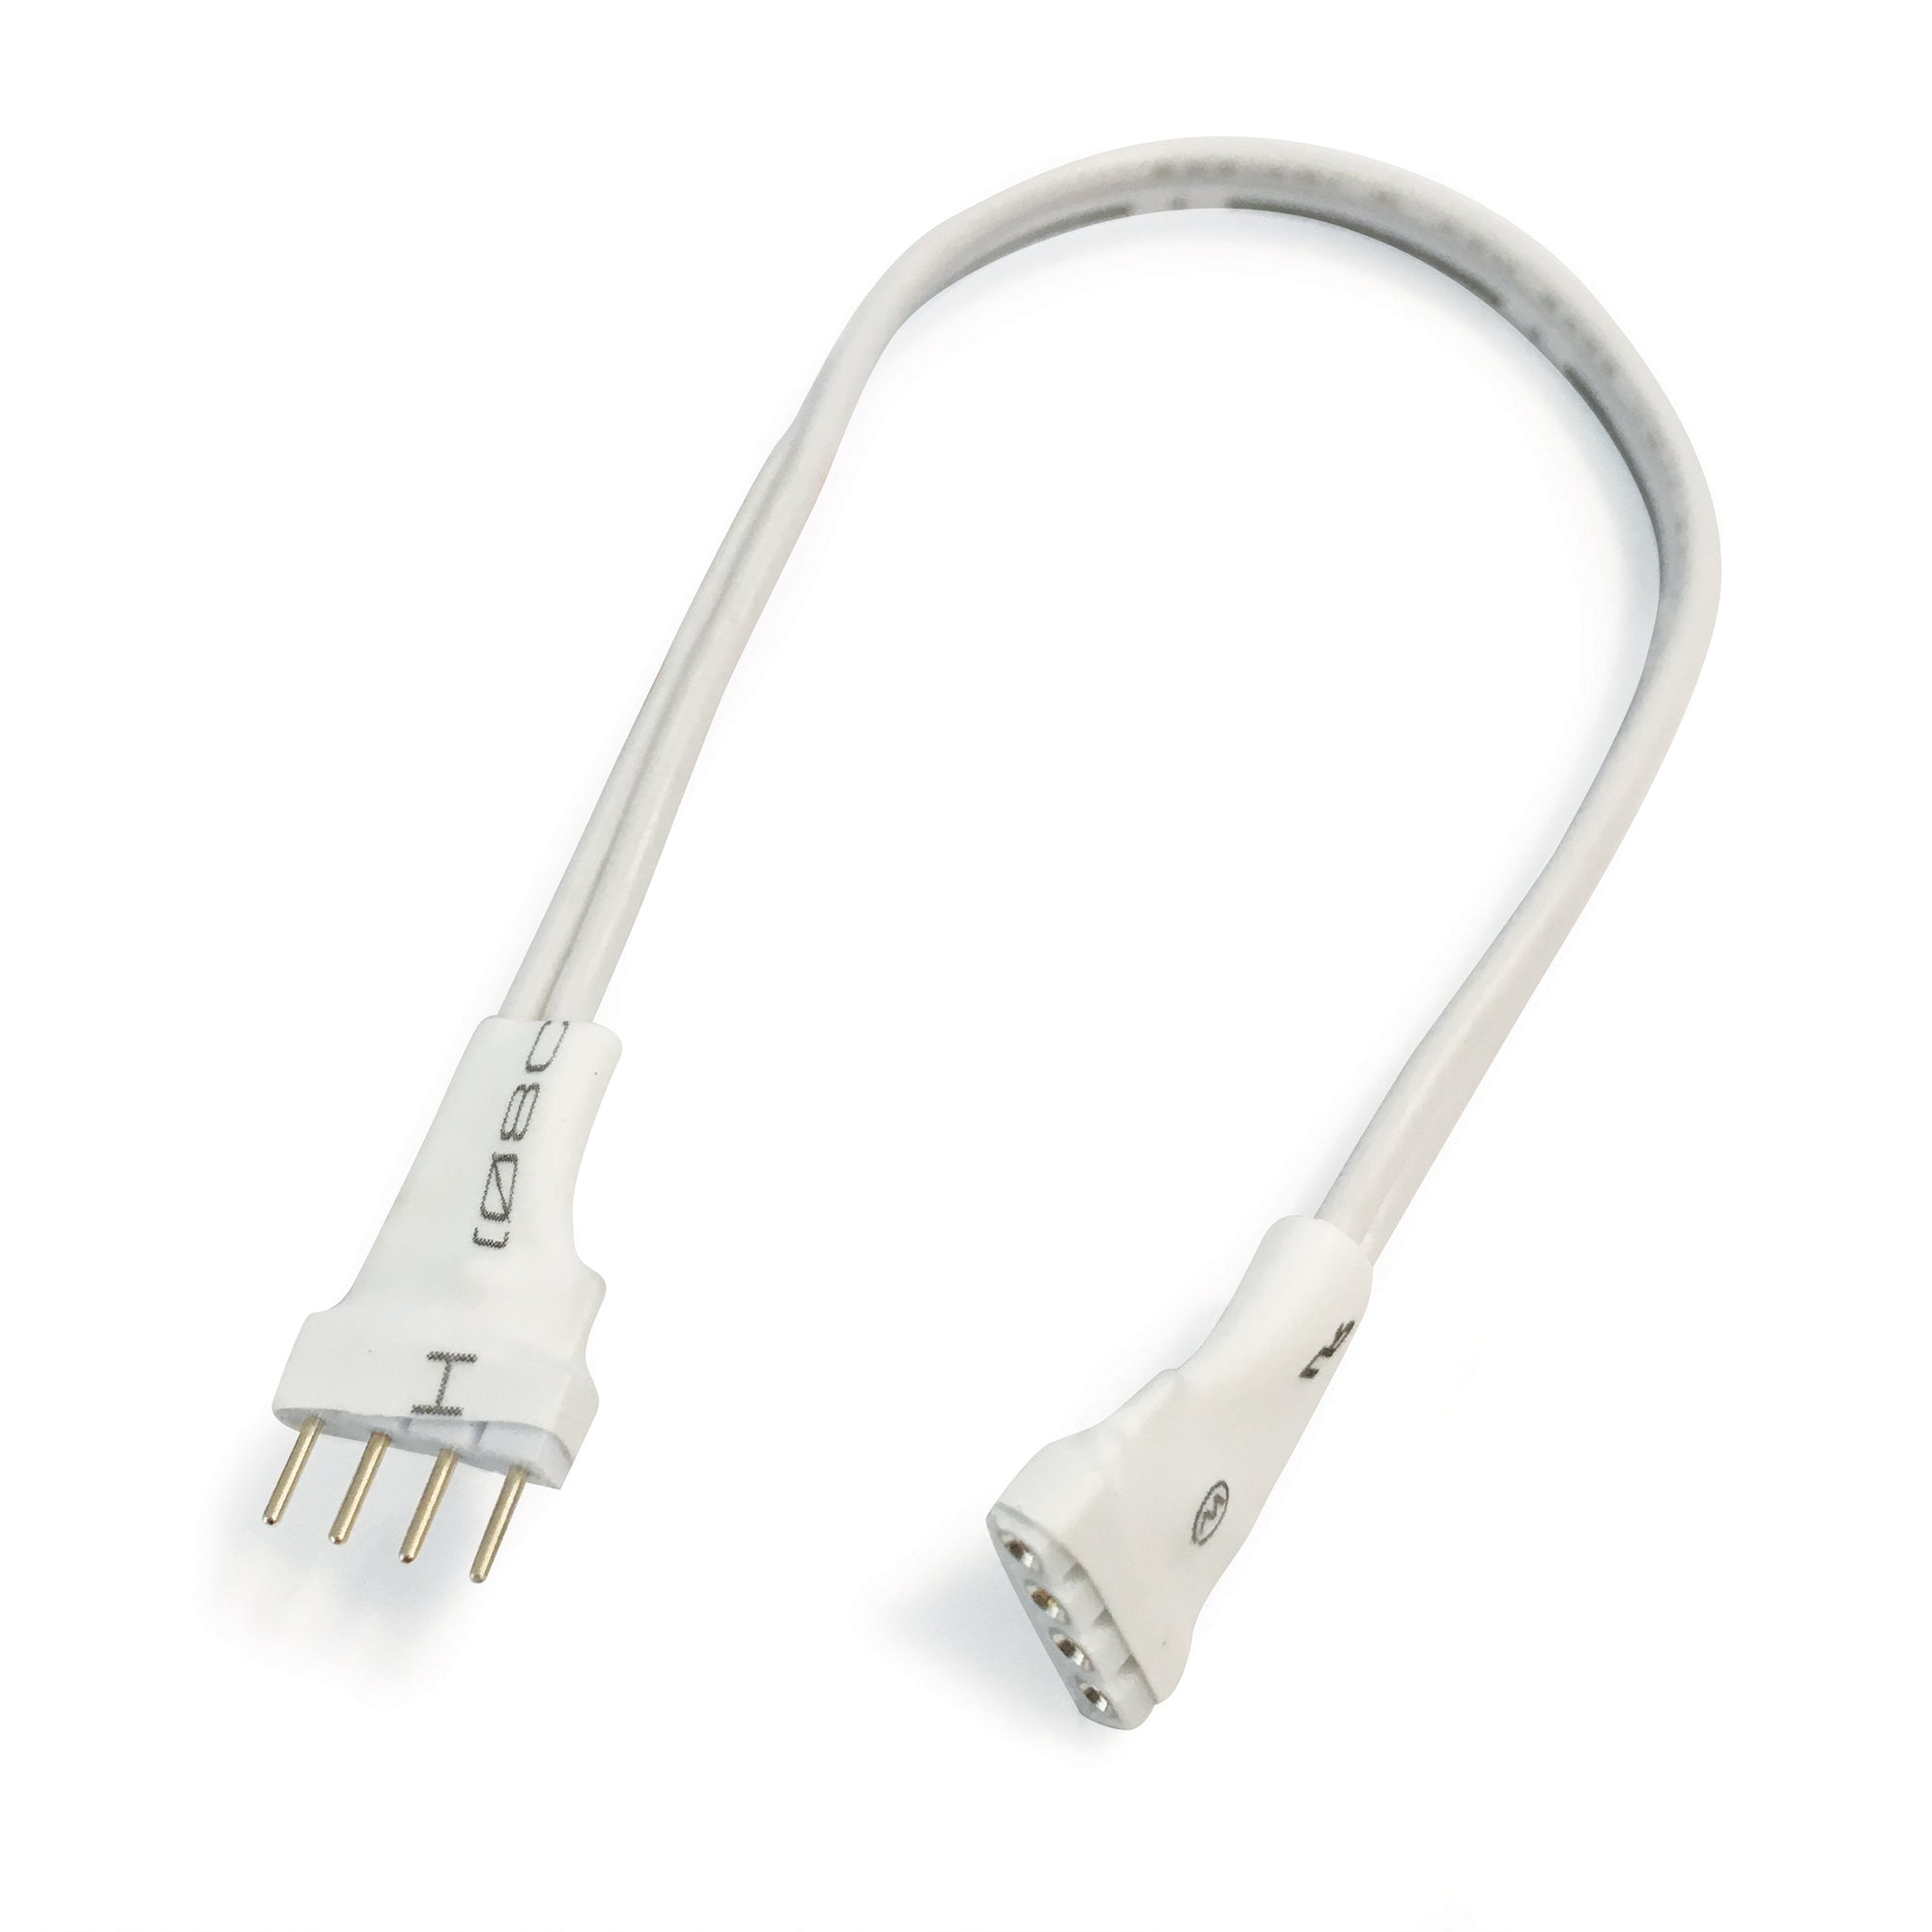 Nora Lighting NARGBW-936W - Accent / Undercabinet - 36 Inch Interconnection Cable for RGBW Tape Light